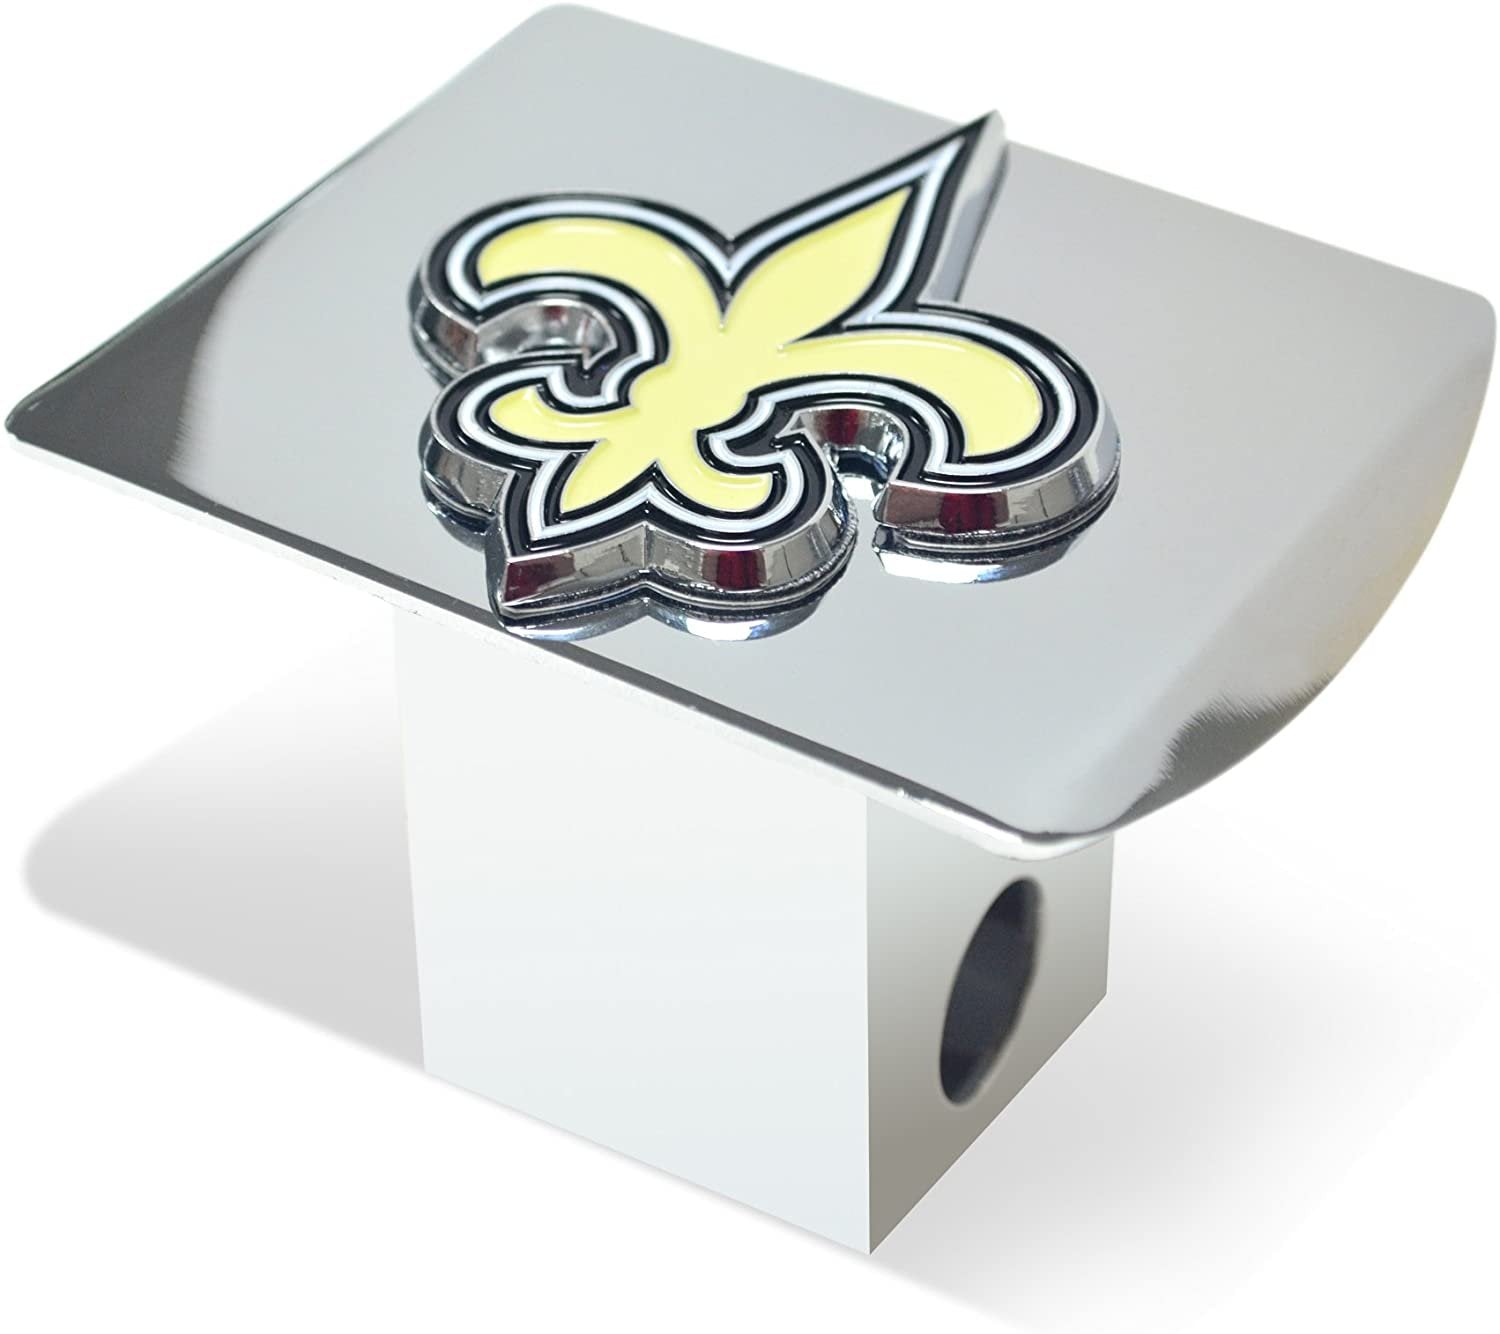 Buffalo Bills Hitch Cover Solid Metal with Raised Color Metal Emblem 2" Square Type III